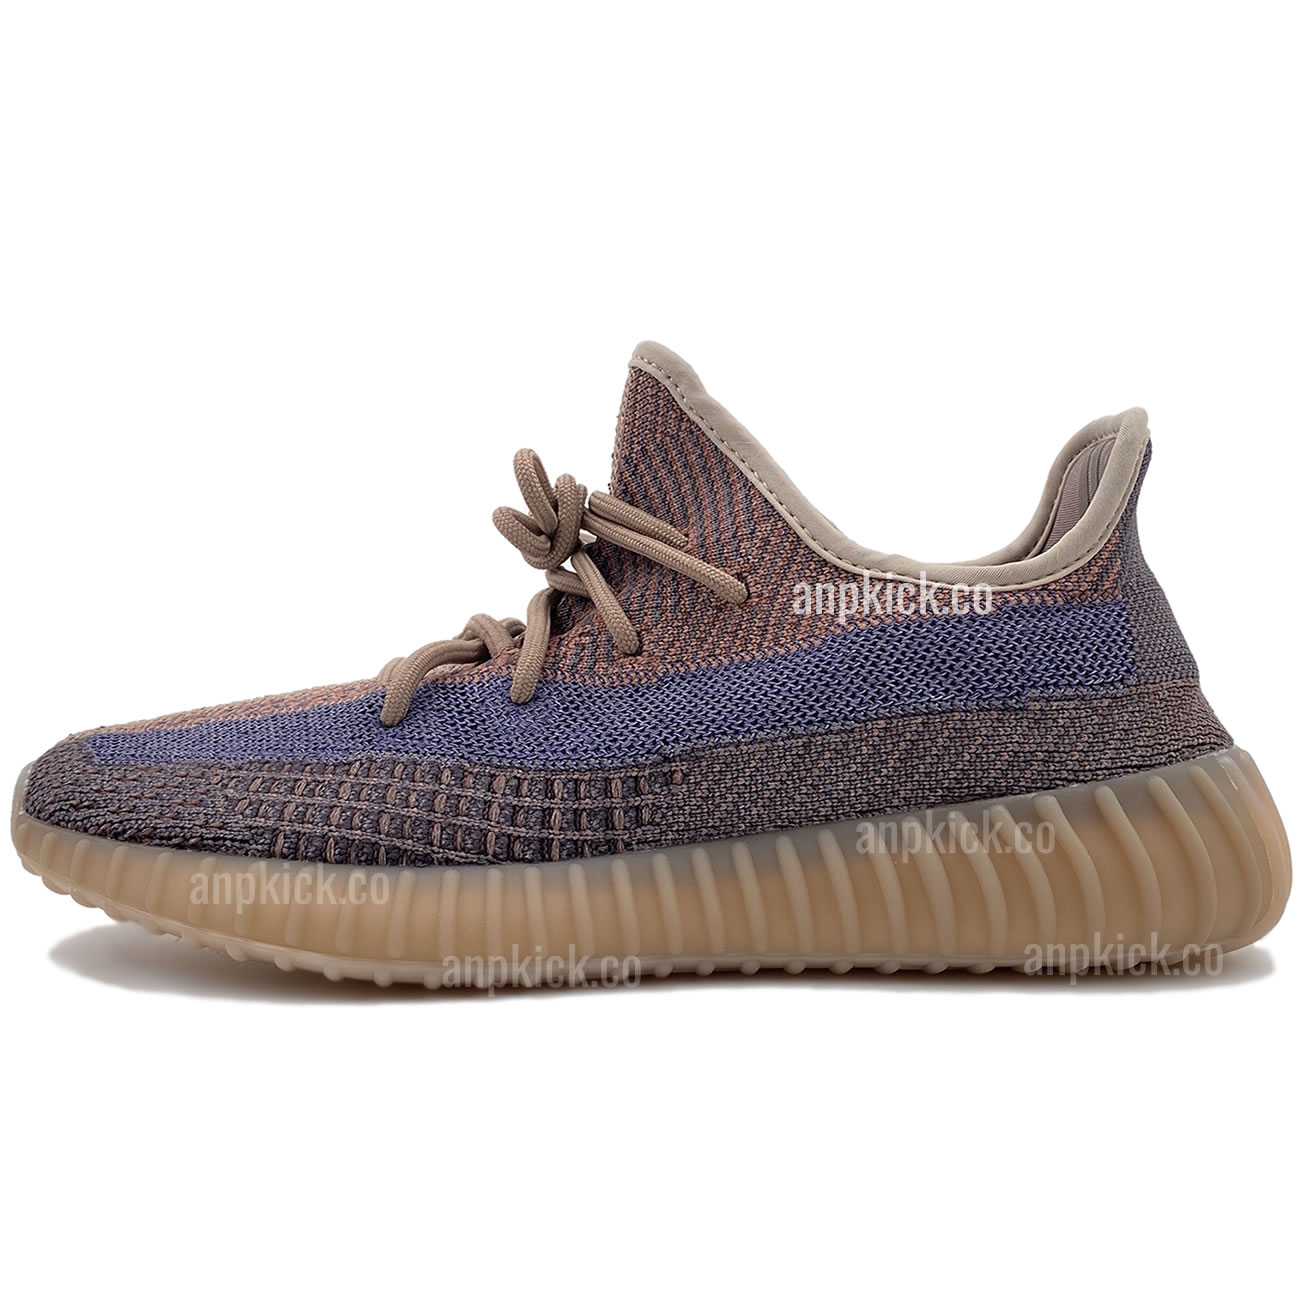 Adidas Yeezy Boost 350 V2 Yecher Ho2795 New Release Date First Look (1) - www.newkick.org